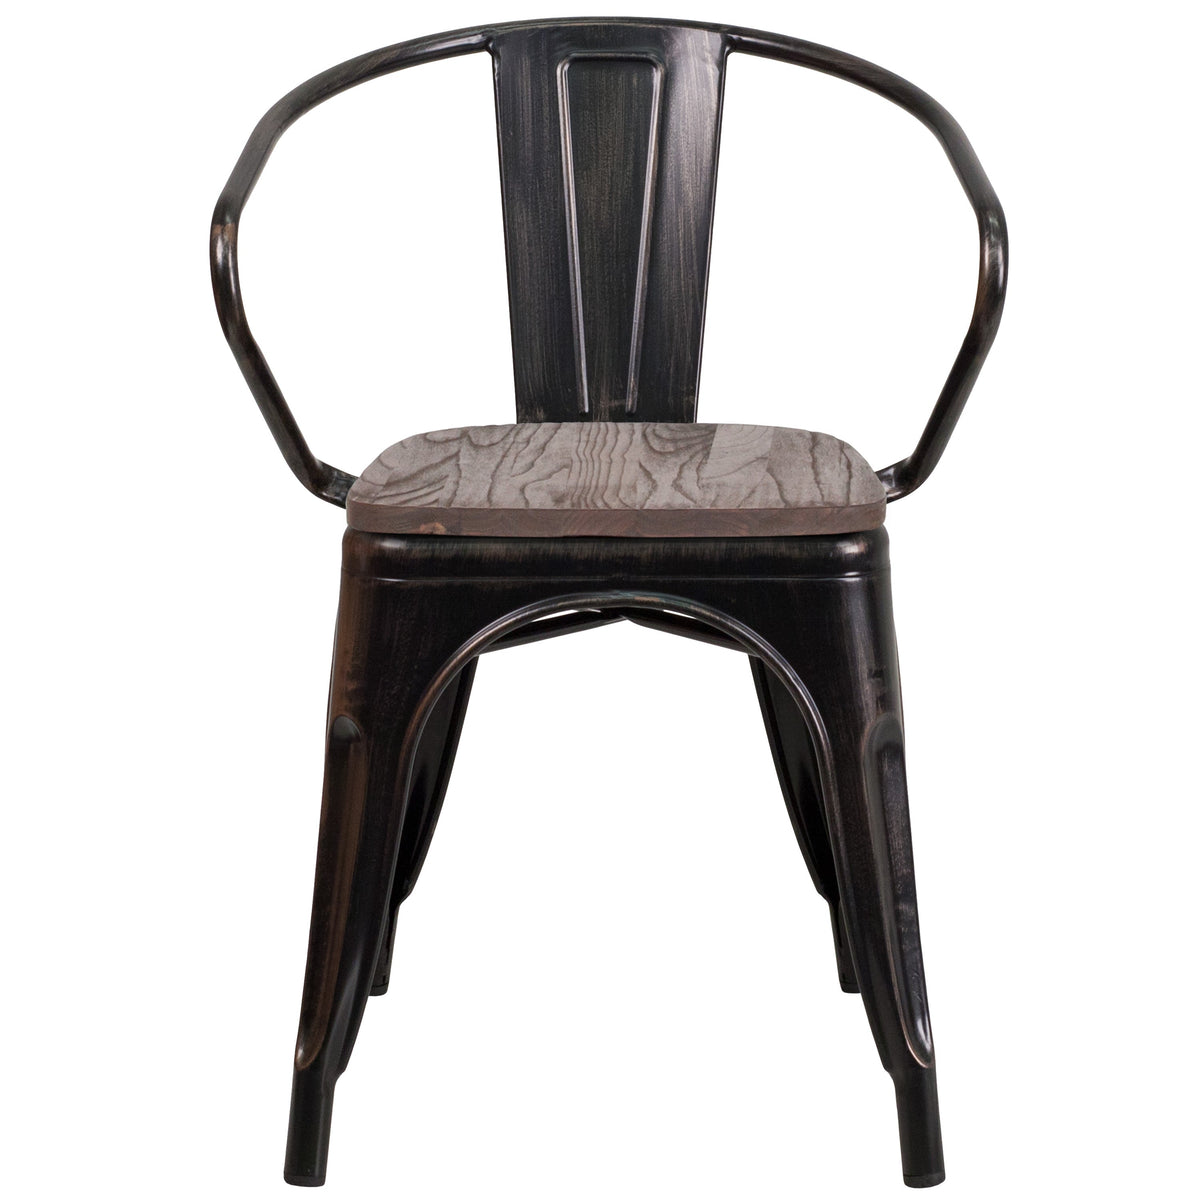 Black-Antique Gold |#| Black-Antique Gold Stackable Metal Chair with Wood Seat and Arms - Bistro Chair